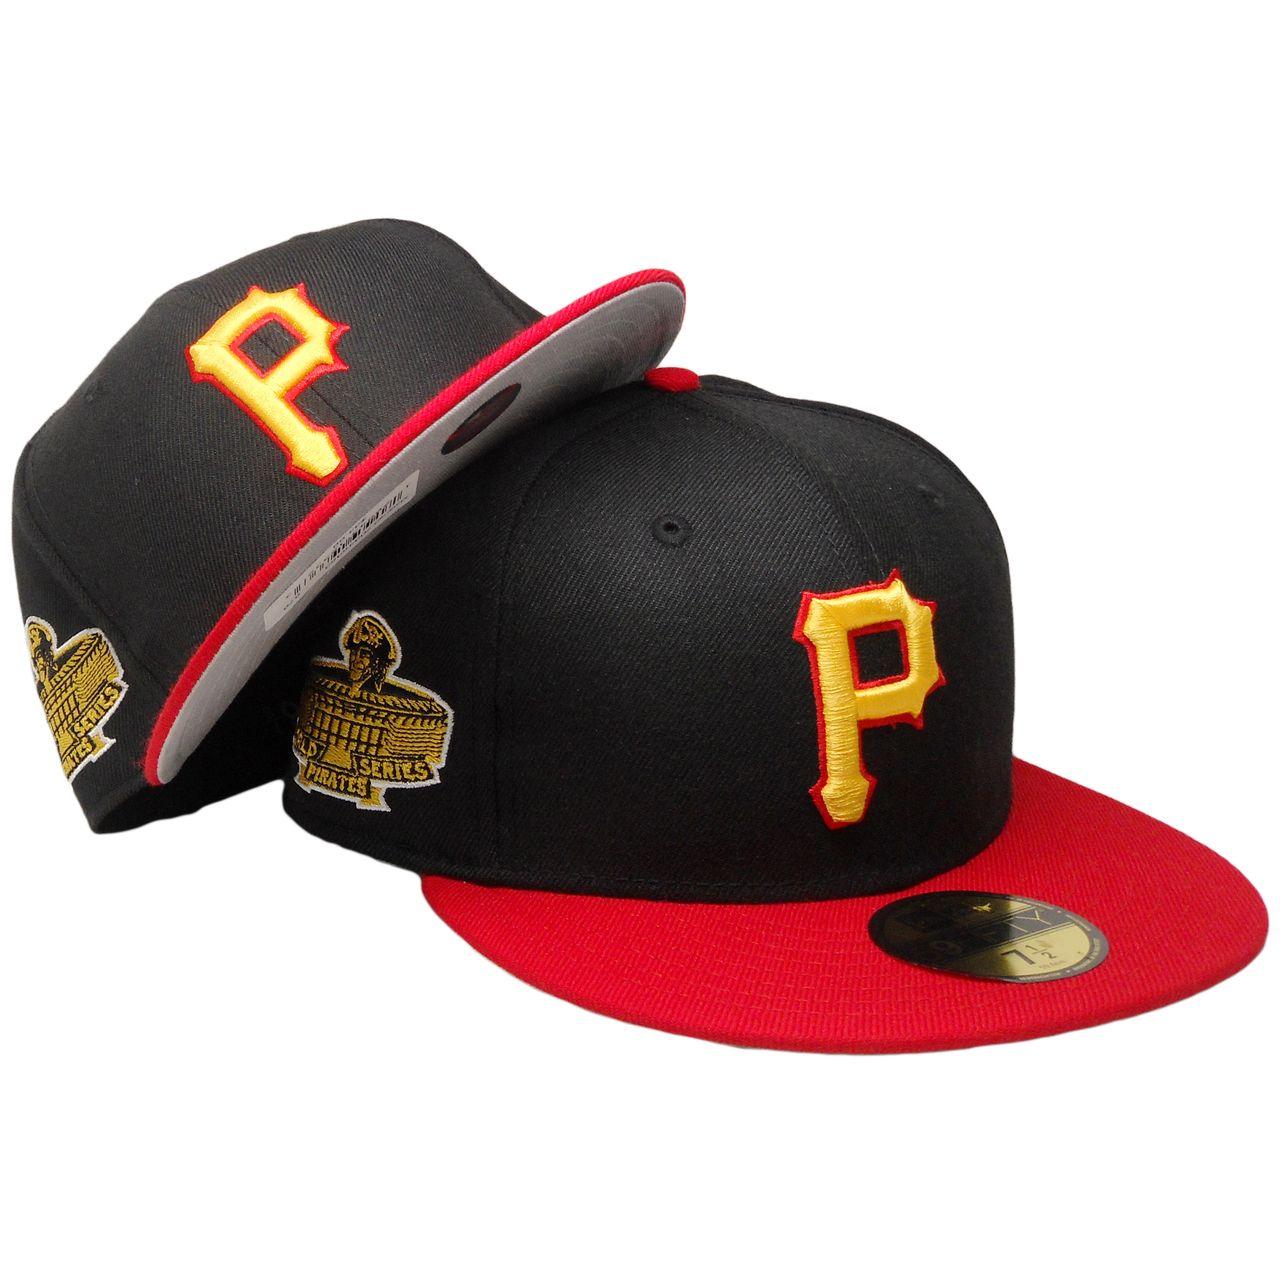 Black N Red and Yellow Logo - Pittsburg Pirates New Era 59Fifty Custom Fitted Hat - Black, Red ...